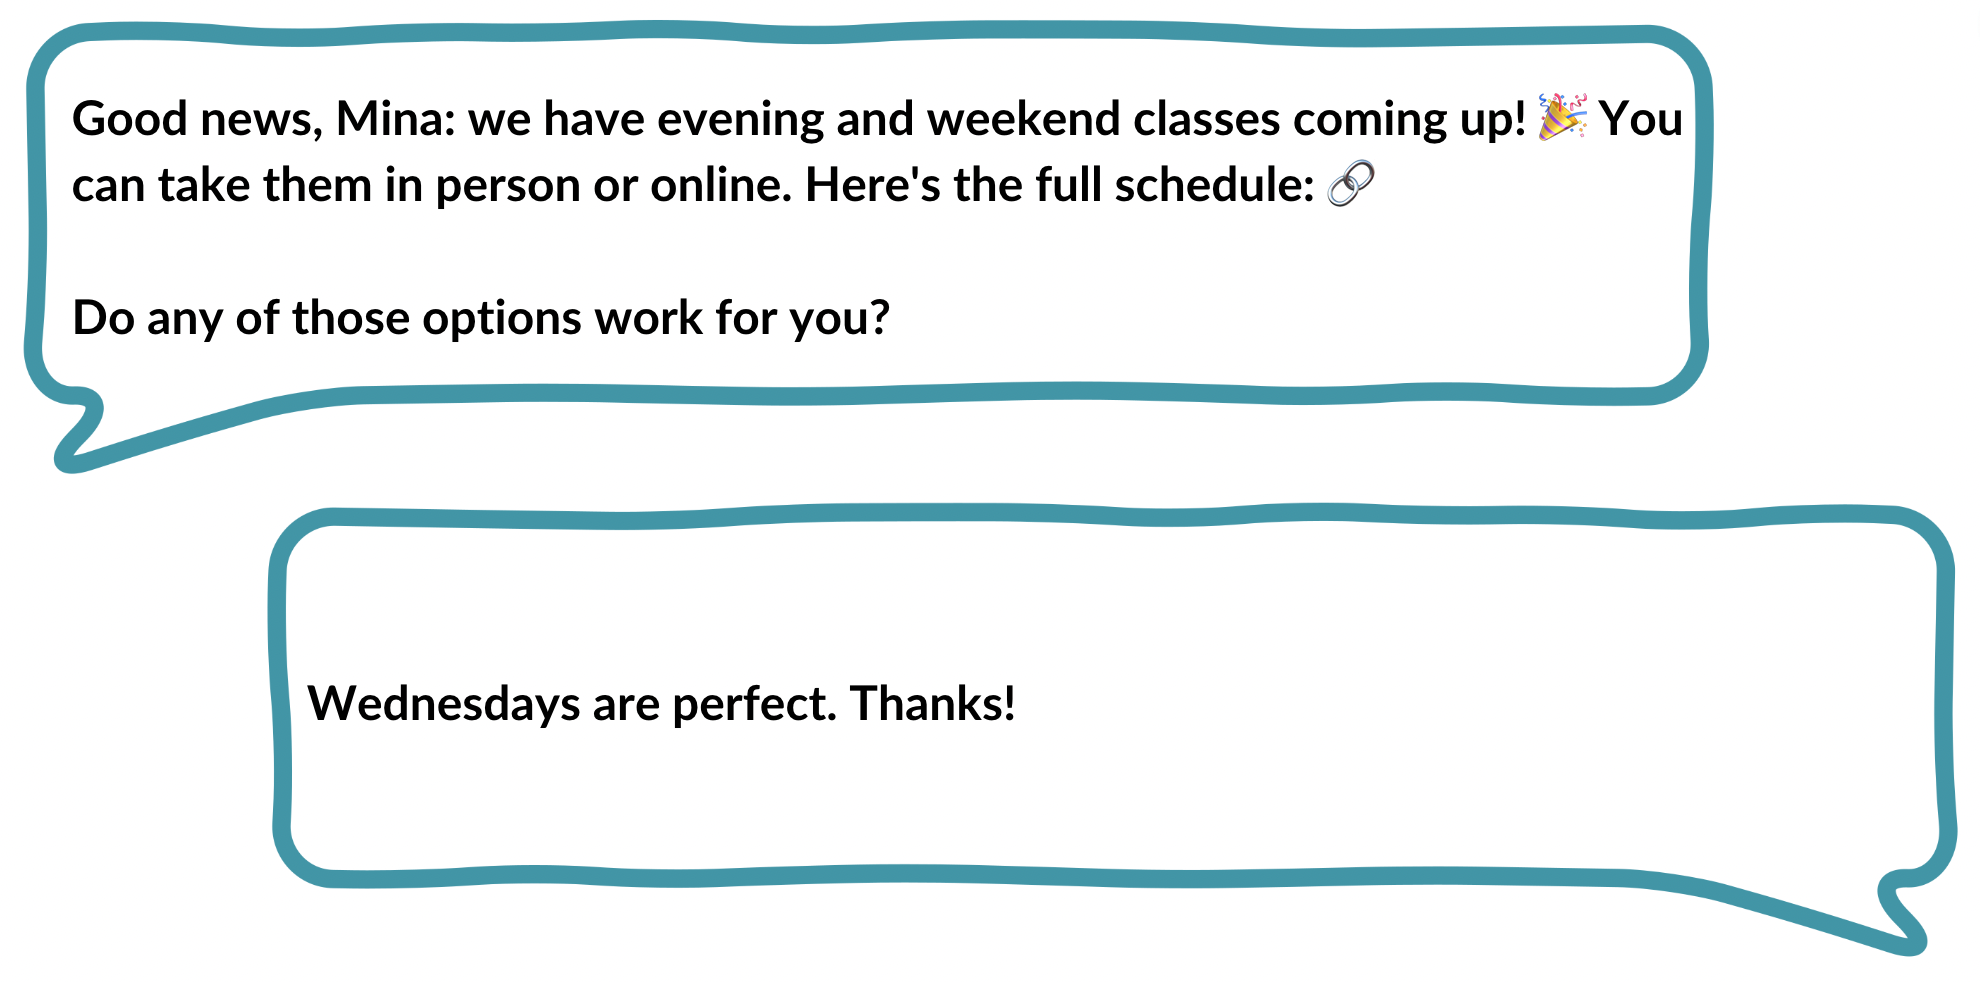 two text bubbles - the first says "Good news, Mina: we have evening and weekend classes coming up! You can take them in person or online. Here's the full schedule. Do any of those options work for you?" and the second says "wednesdsays are perfect, thanks"